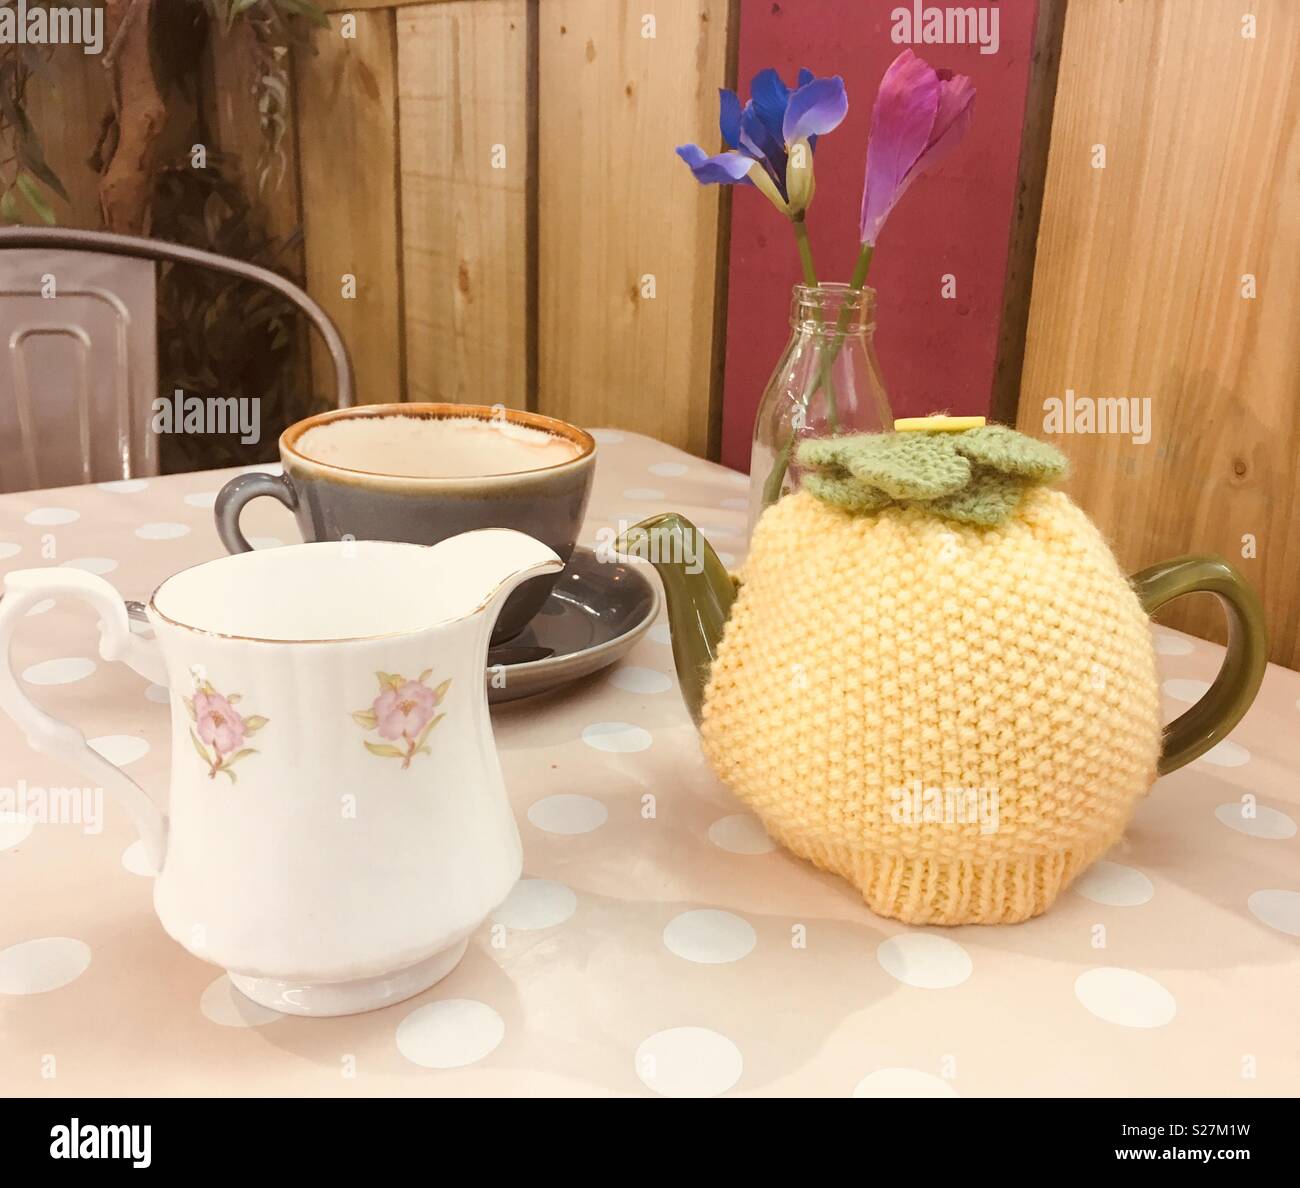 Time for tea. Teapot and tea cosy with milk jug and tea cup on spotted tablecloth with flowers. Stock Photo